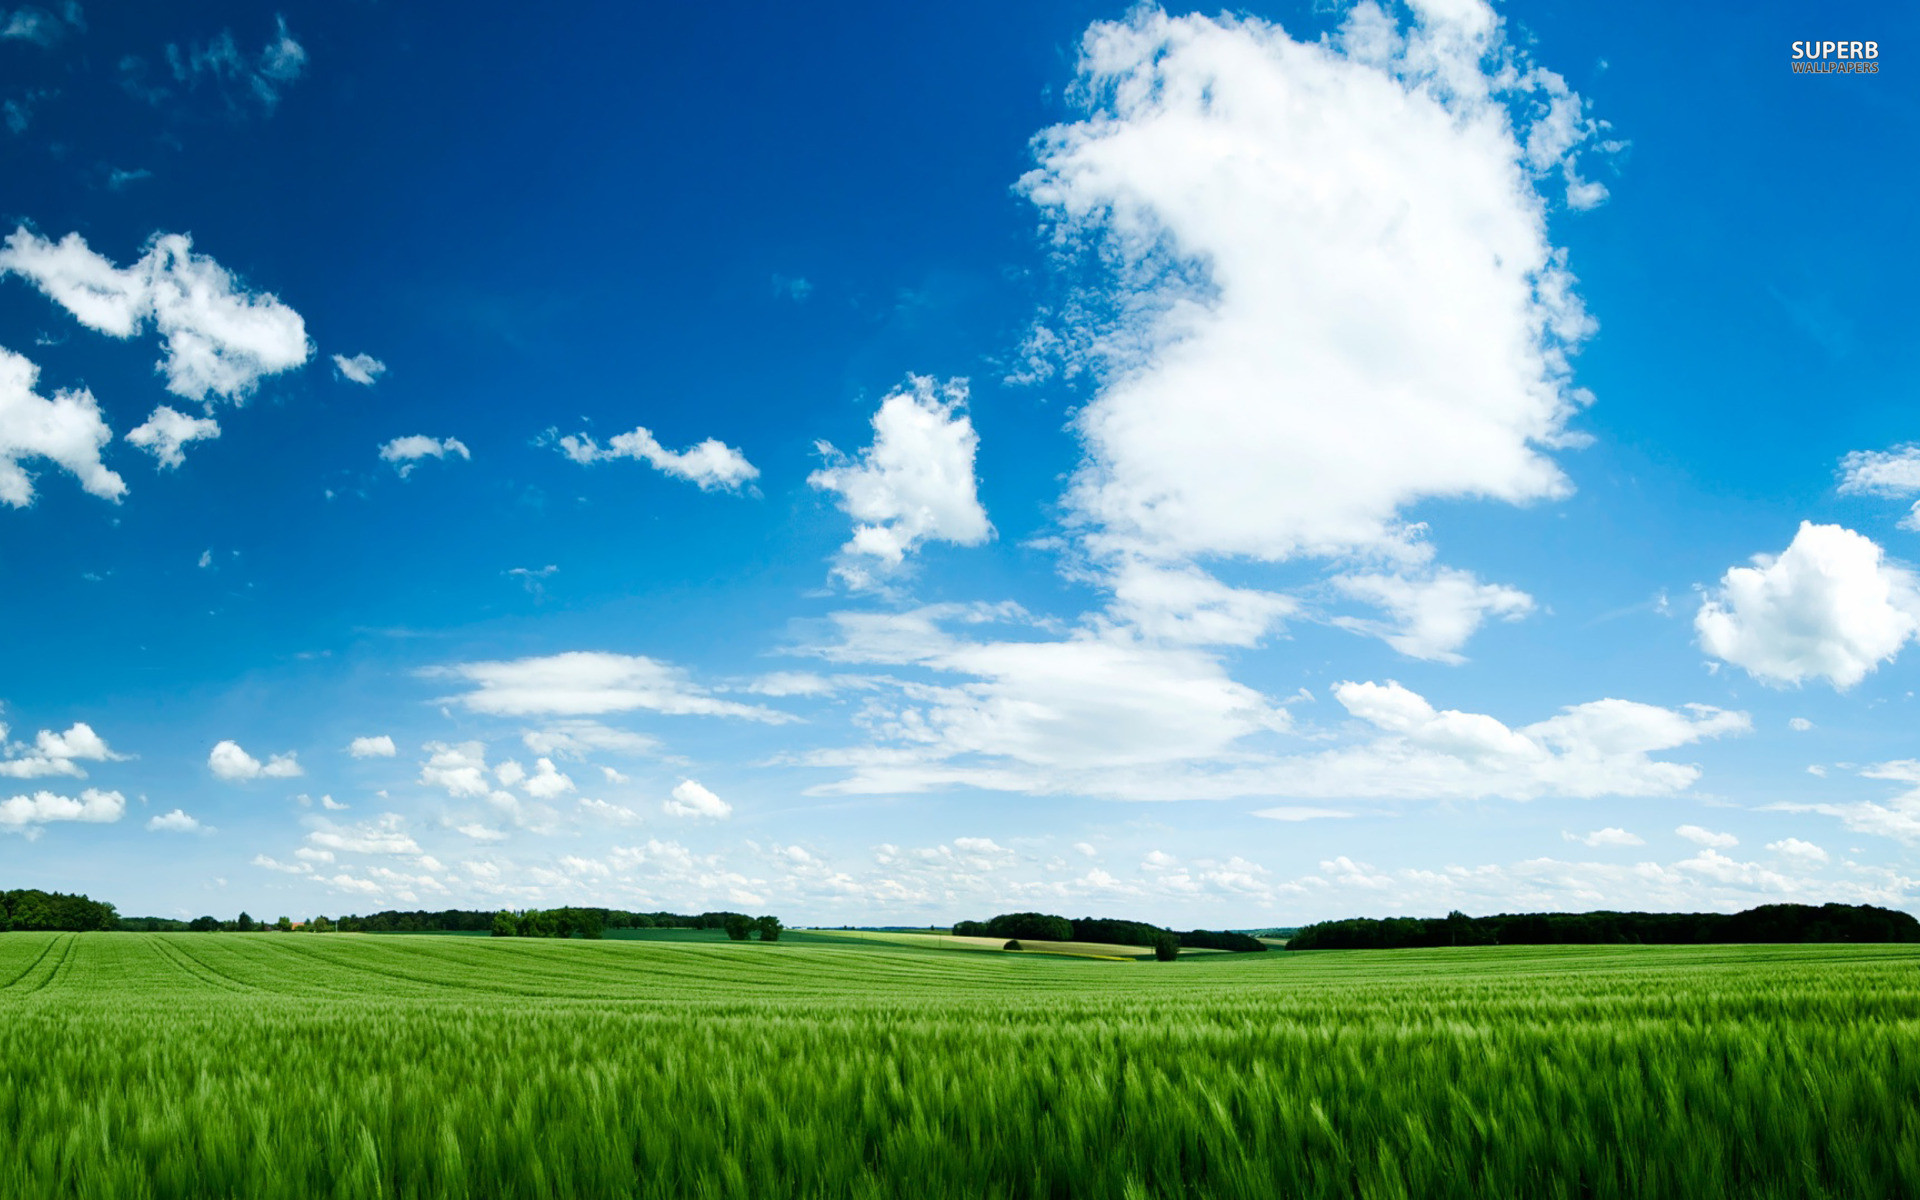 Grass And Sky Wallpaper (71+ images)